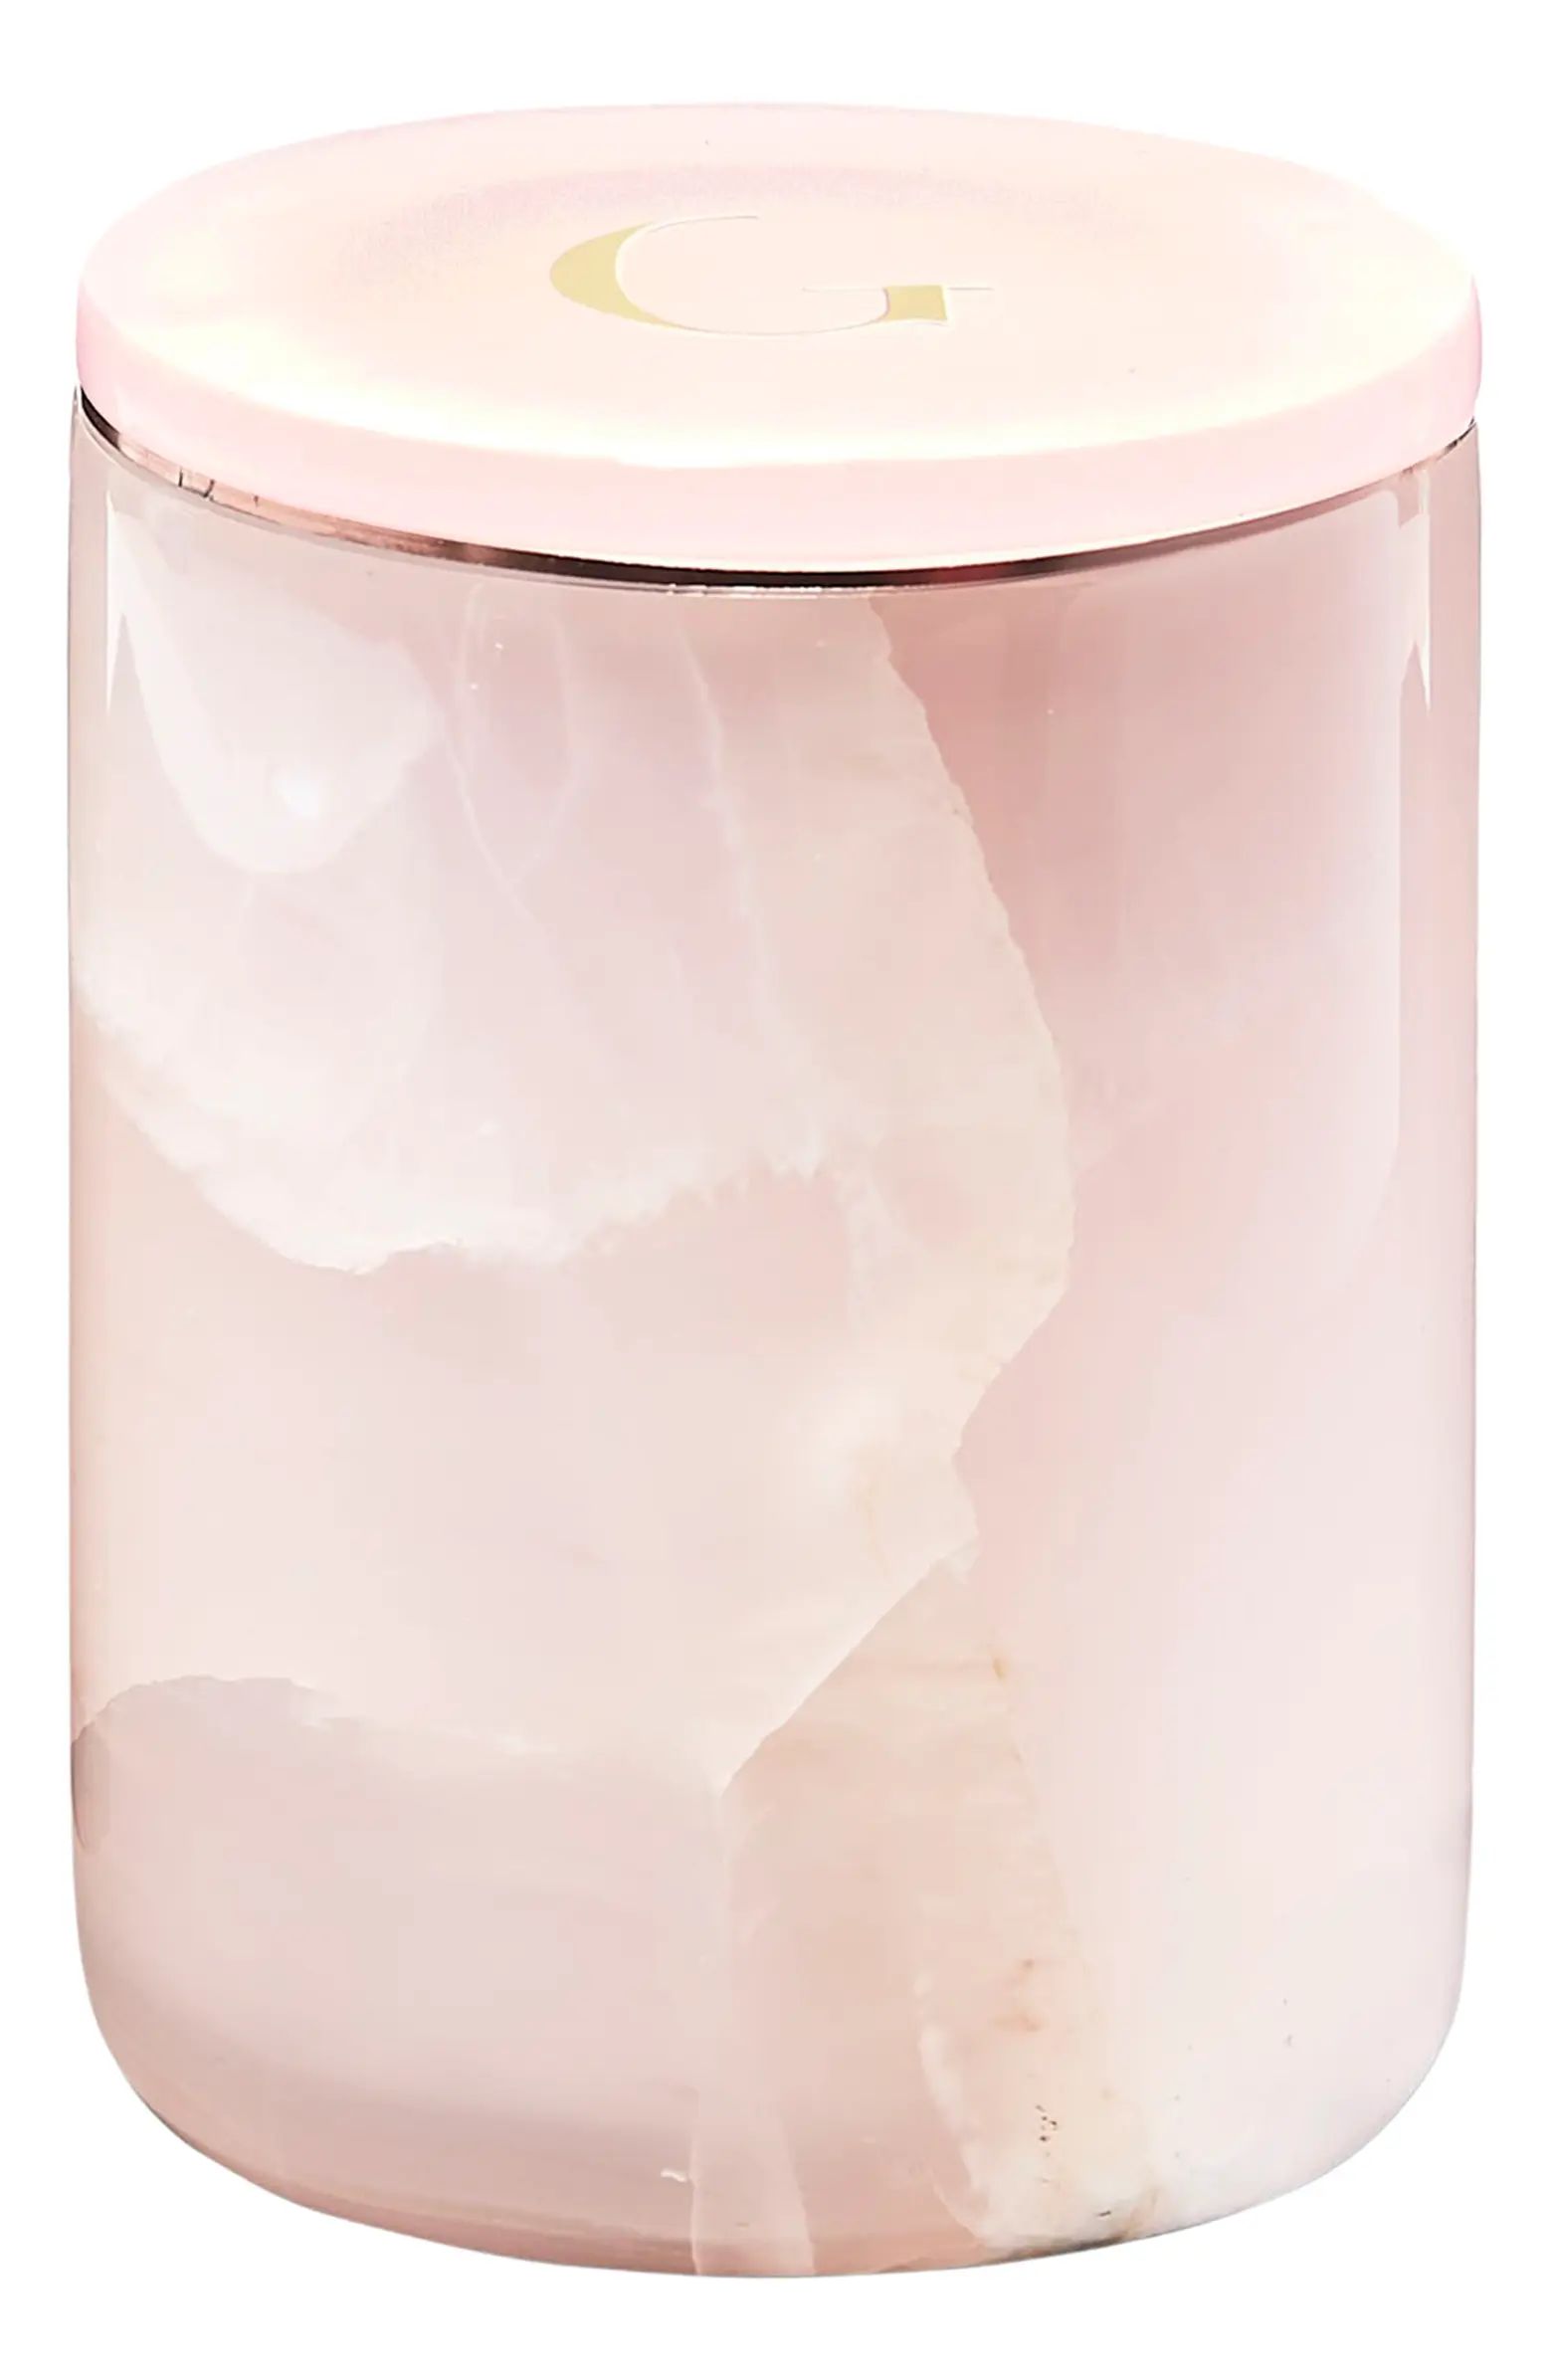 GILDED BODY Peach Scented Pink Onyx Marble Candle | Nordstrom | Nordstrom